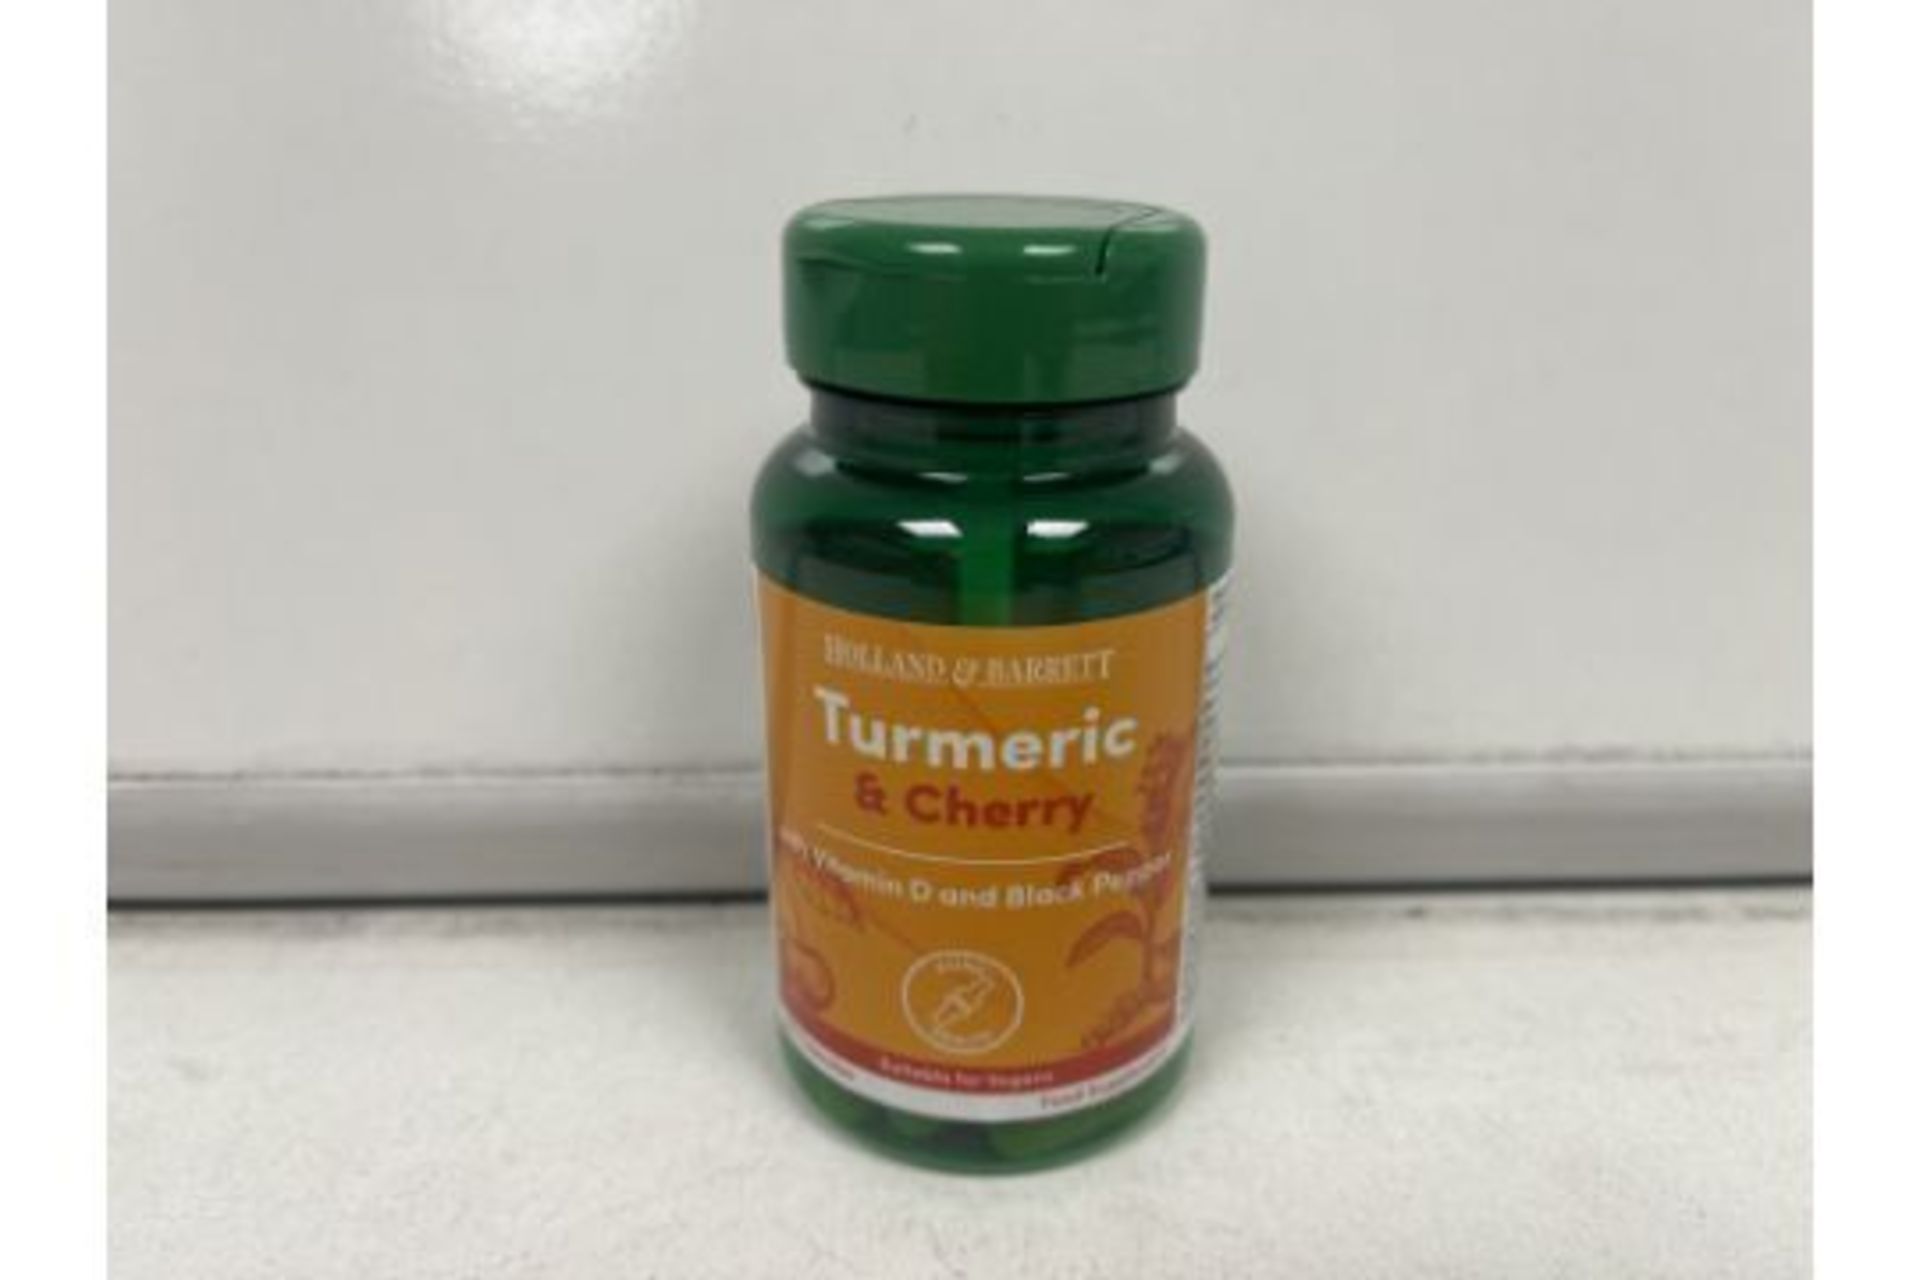 108 X BRAND NEW HOLLAND AND BARRETTPACKS OF 30 CAPSULES TURMERIC AND CHERRY WITH VITAMIN D AND BLACK